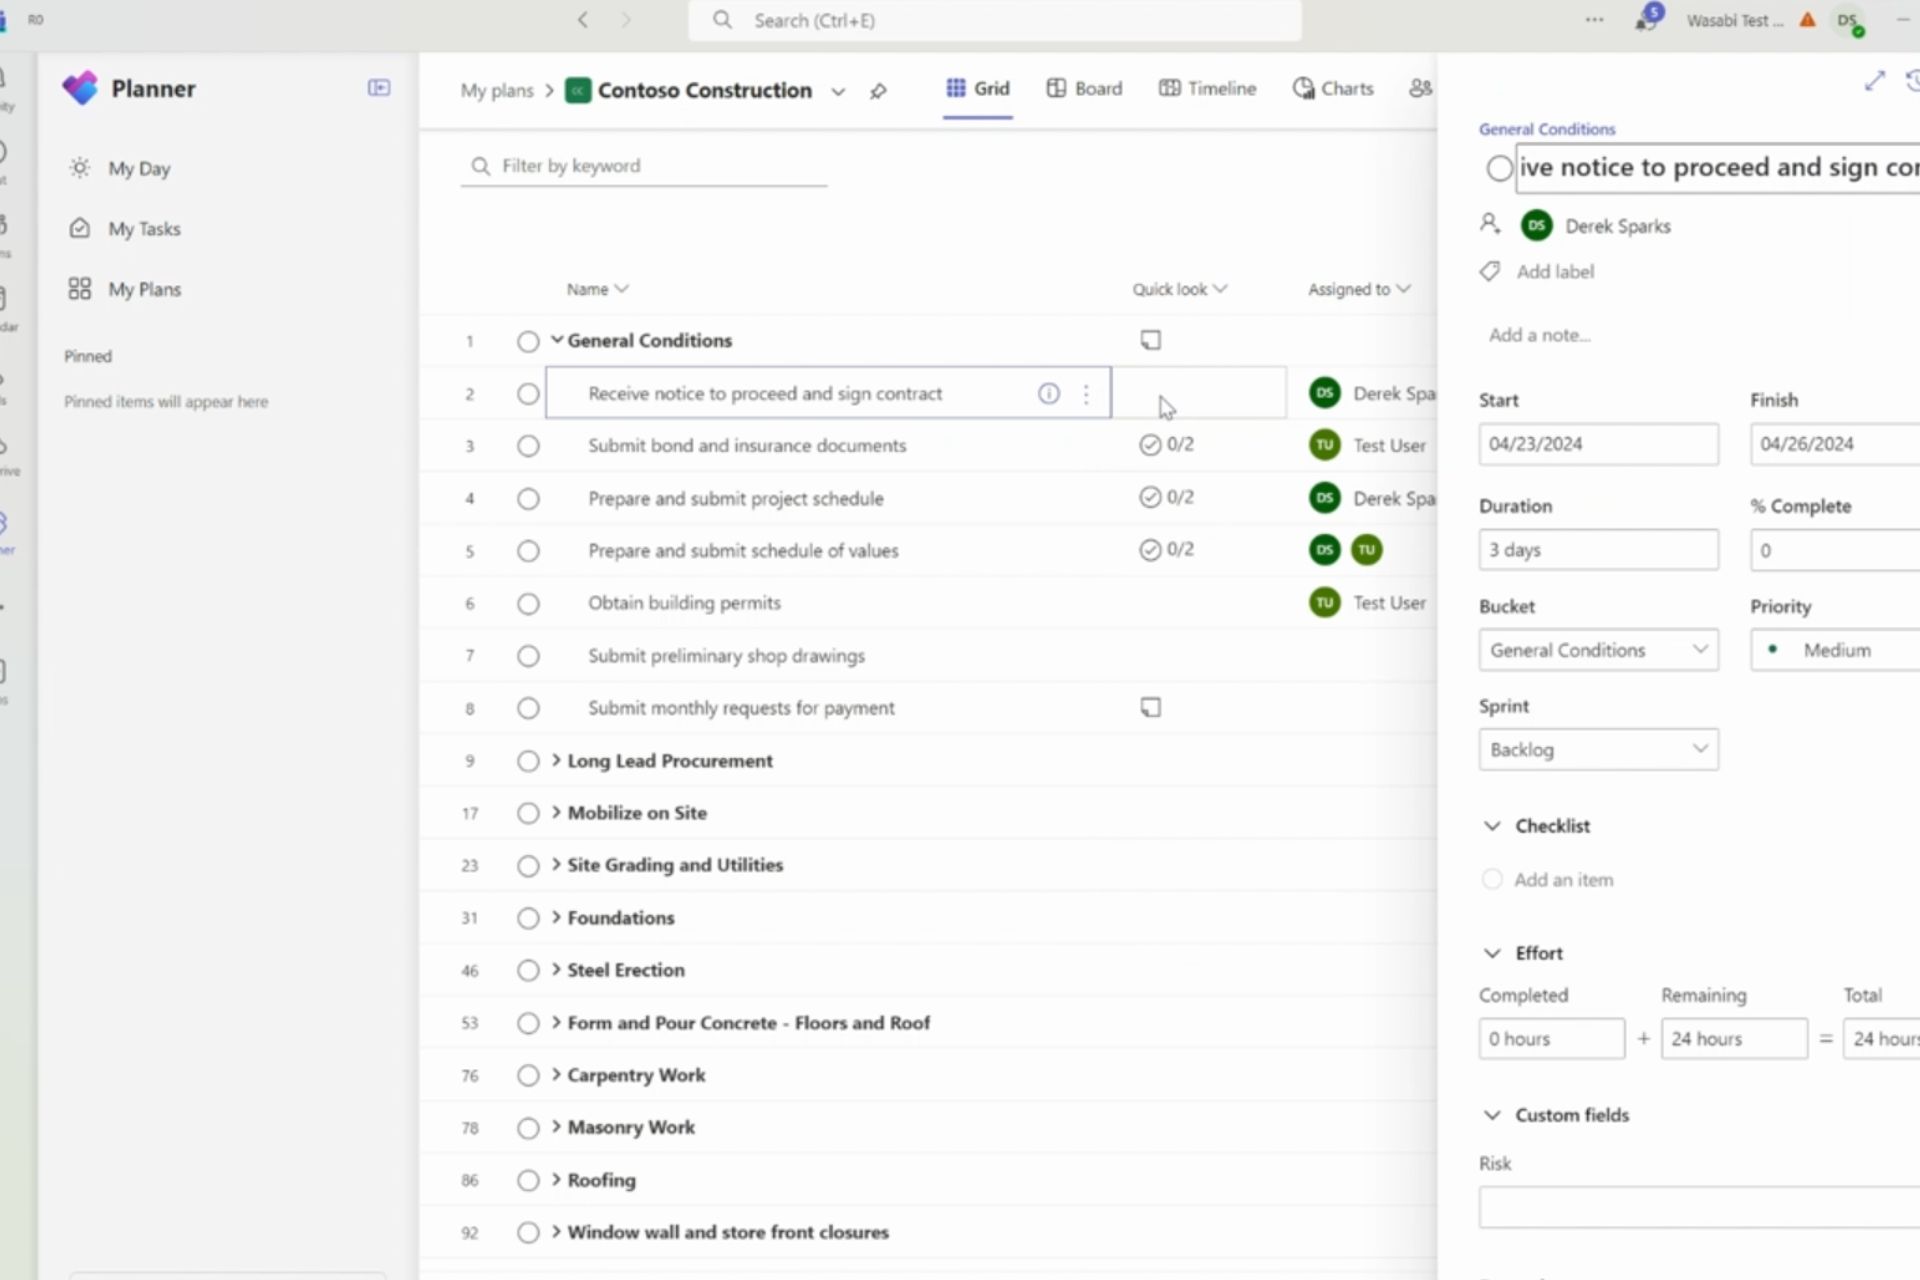 The new Microsoft Planner adds Premium Plan tasks to the My Tasks panel